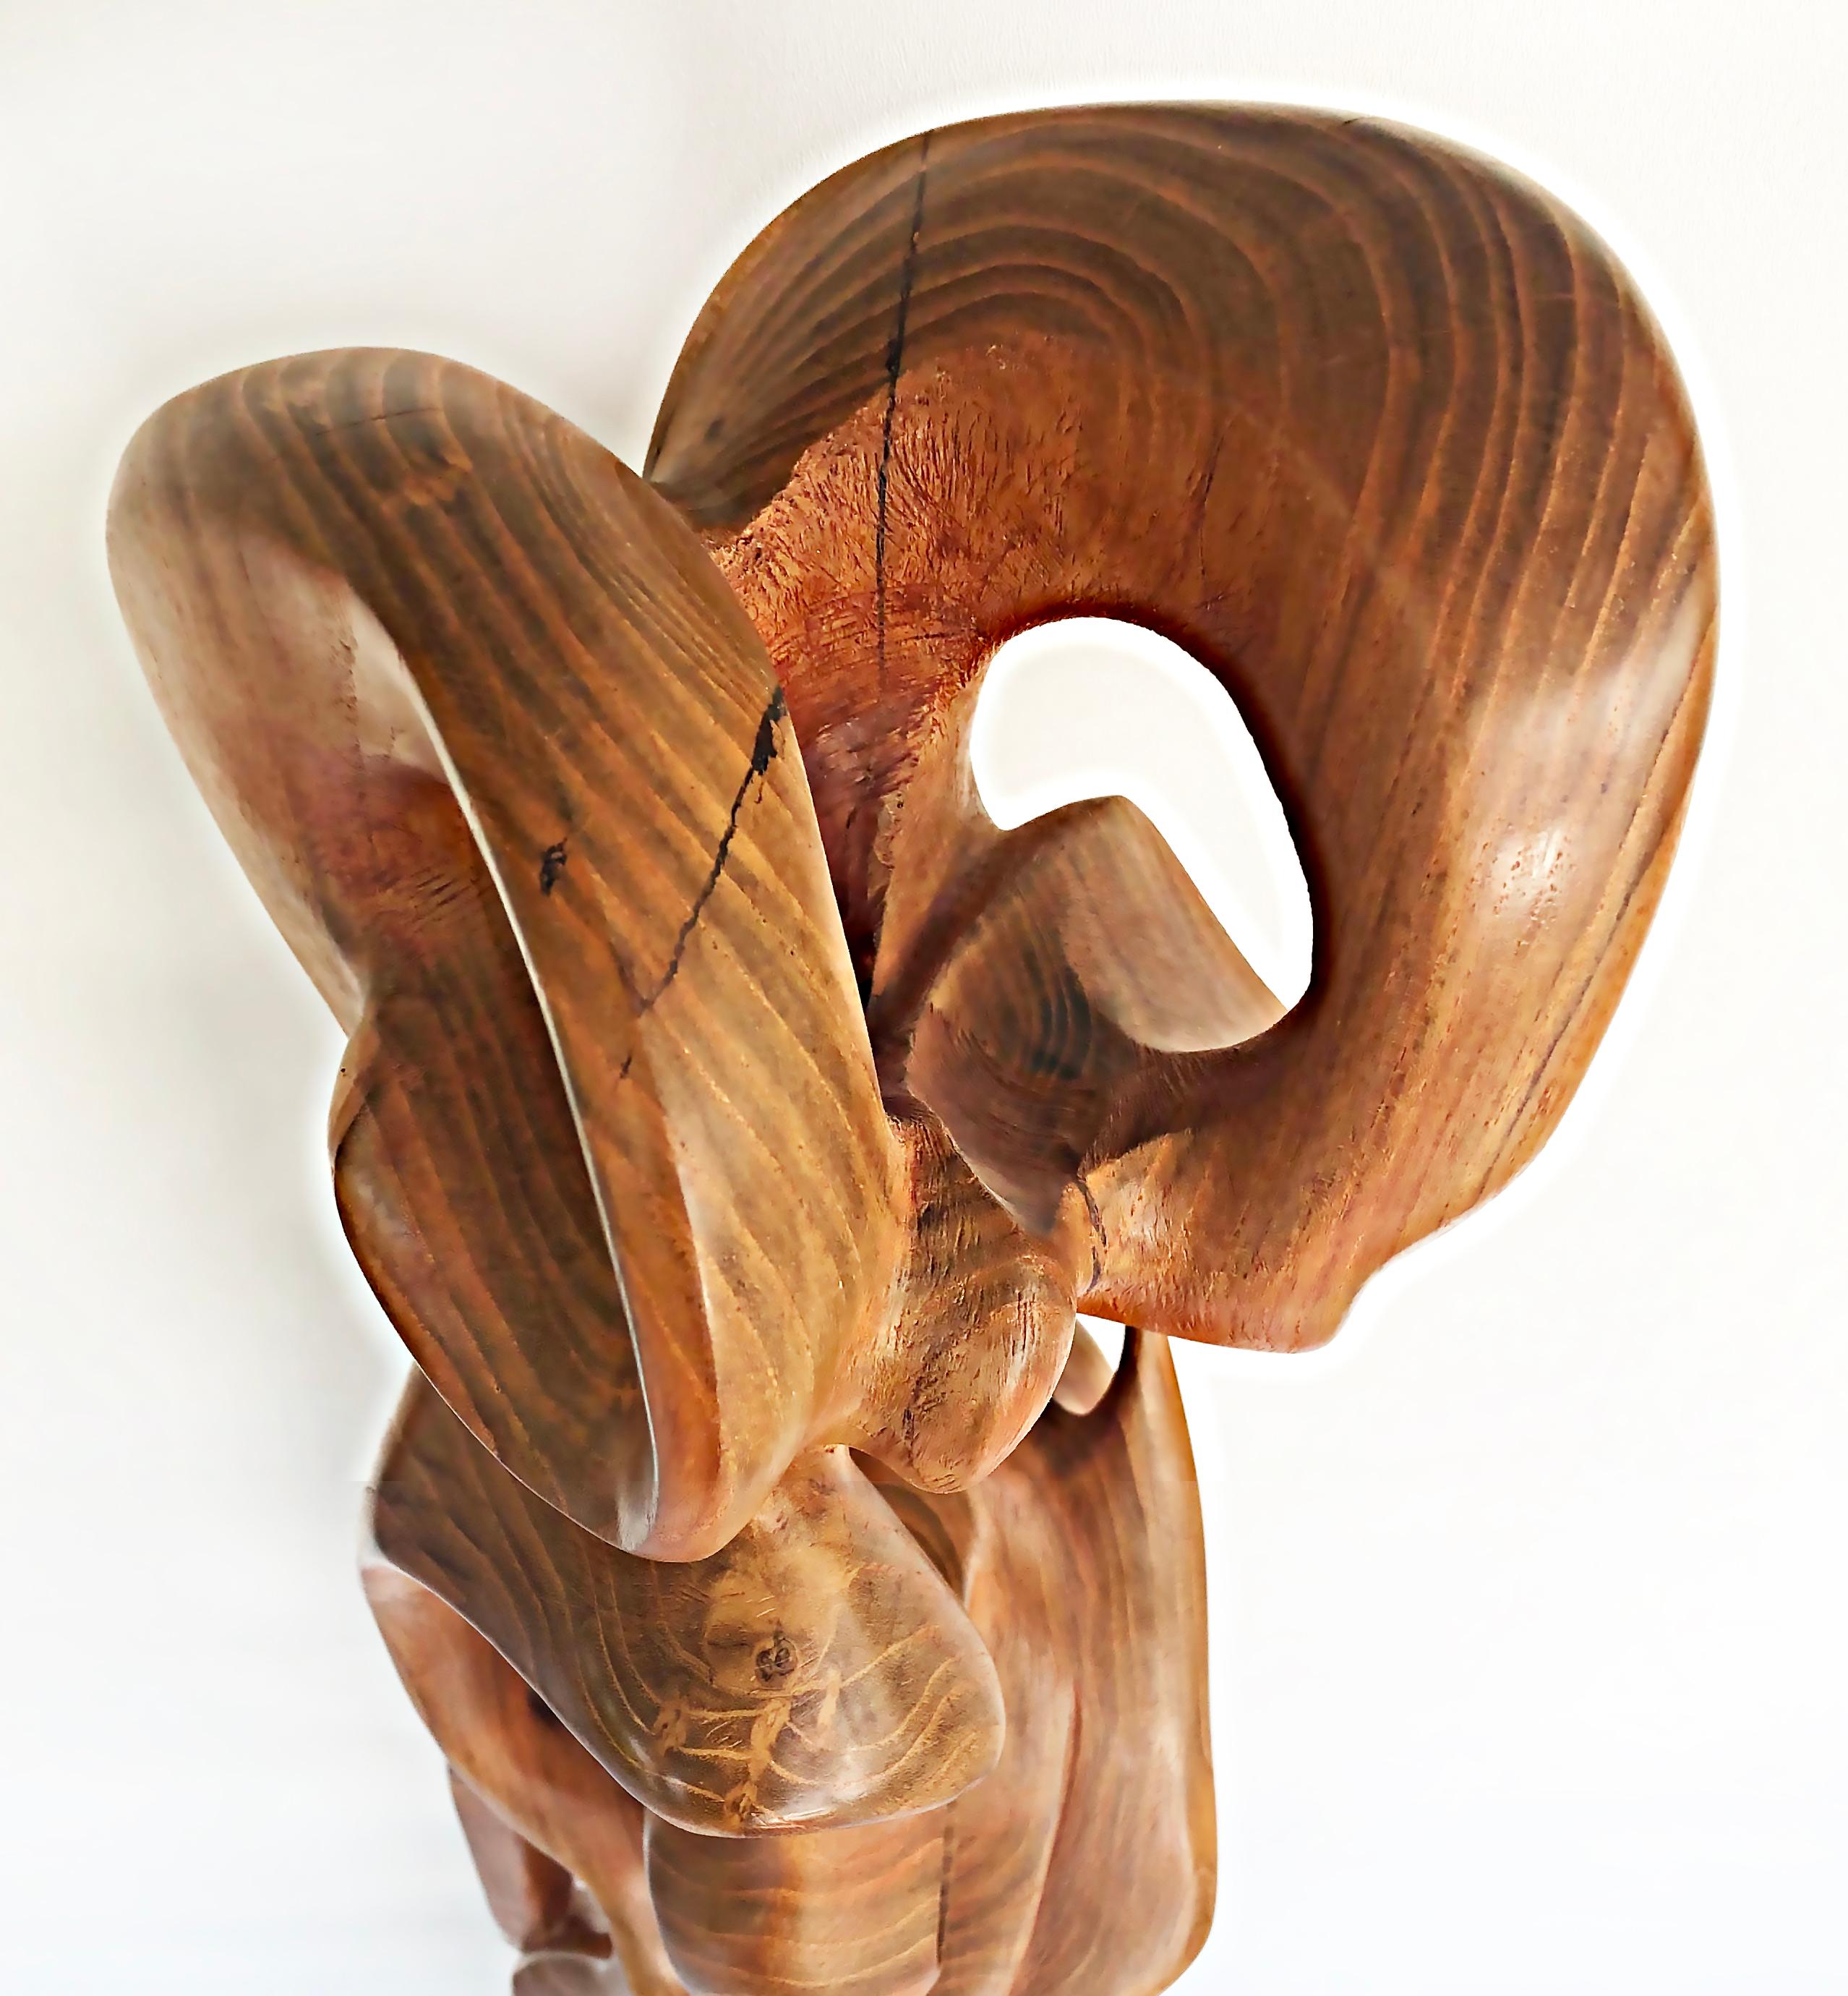 Tall Carved Teak Sculpture by Ramon Barales, Cuban American Artist, 2003 For Sale 7